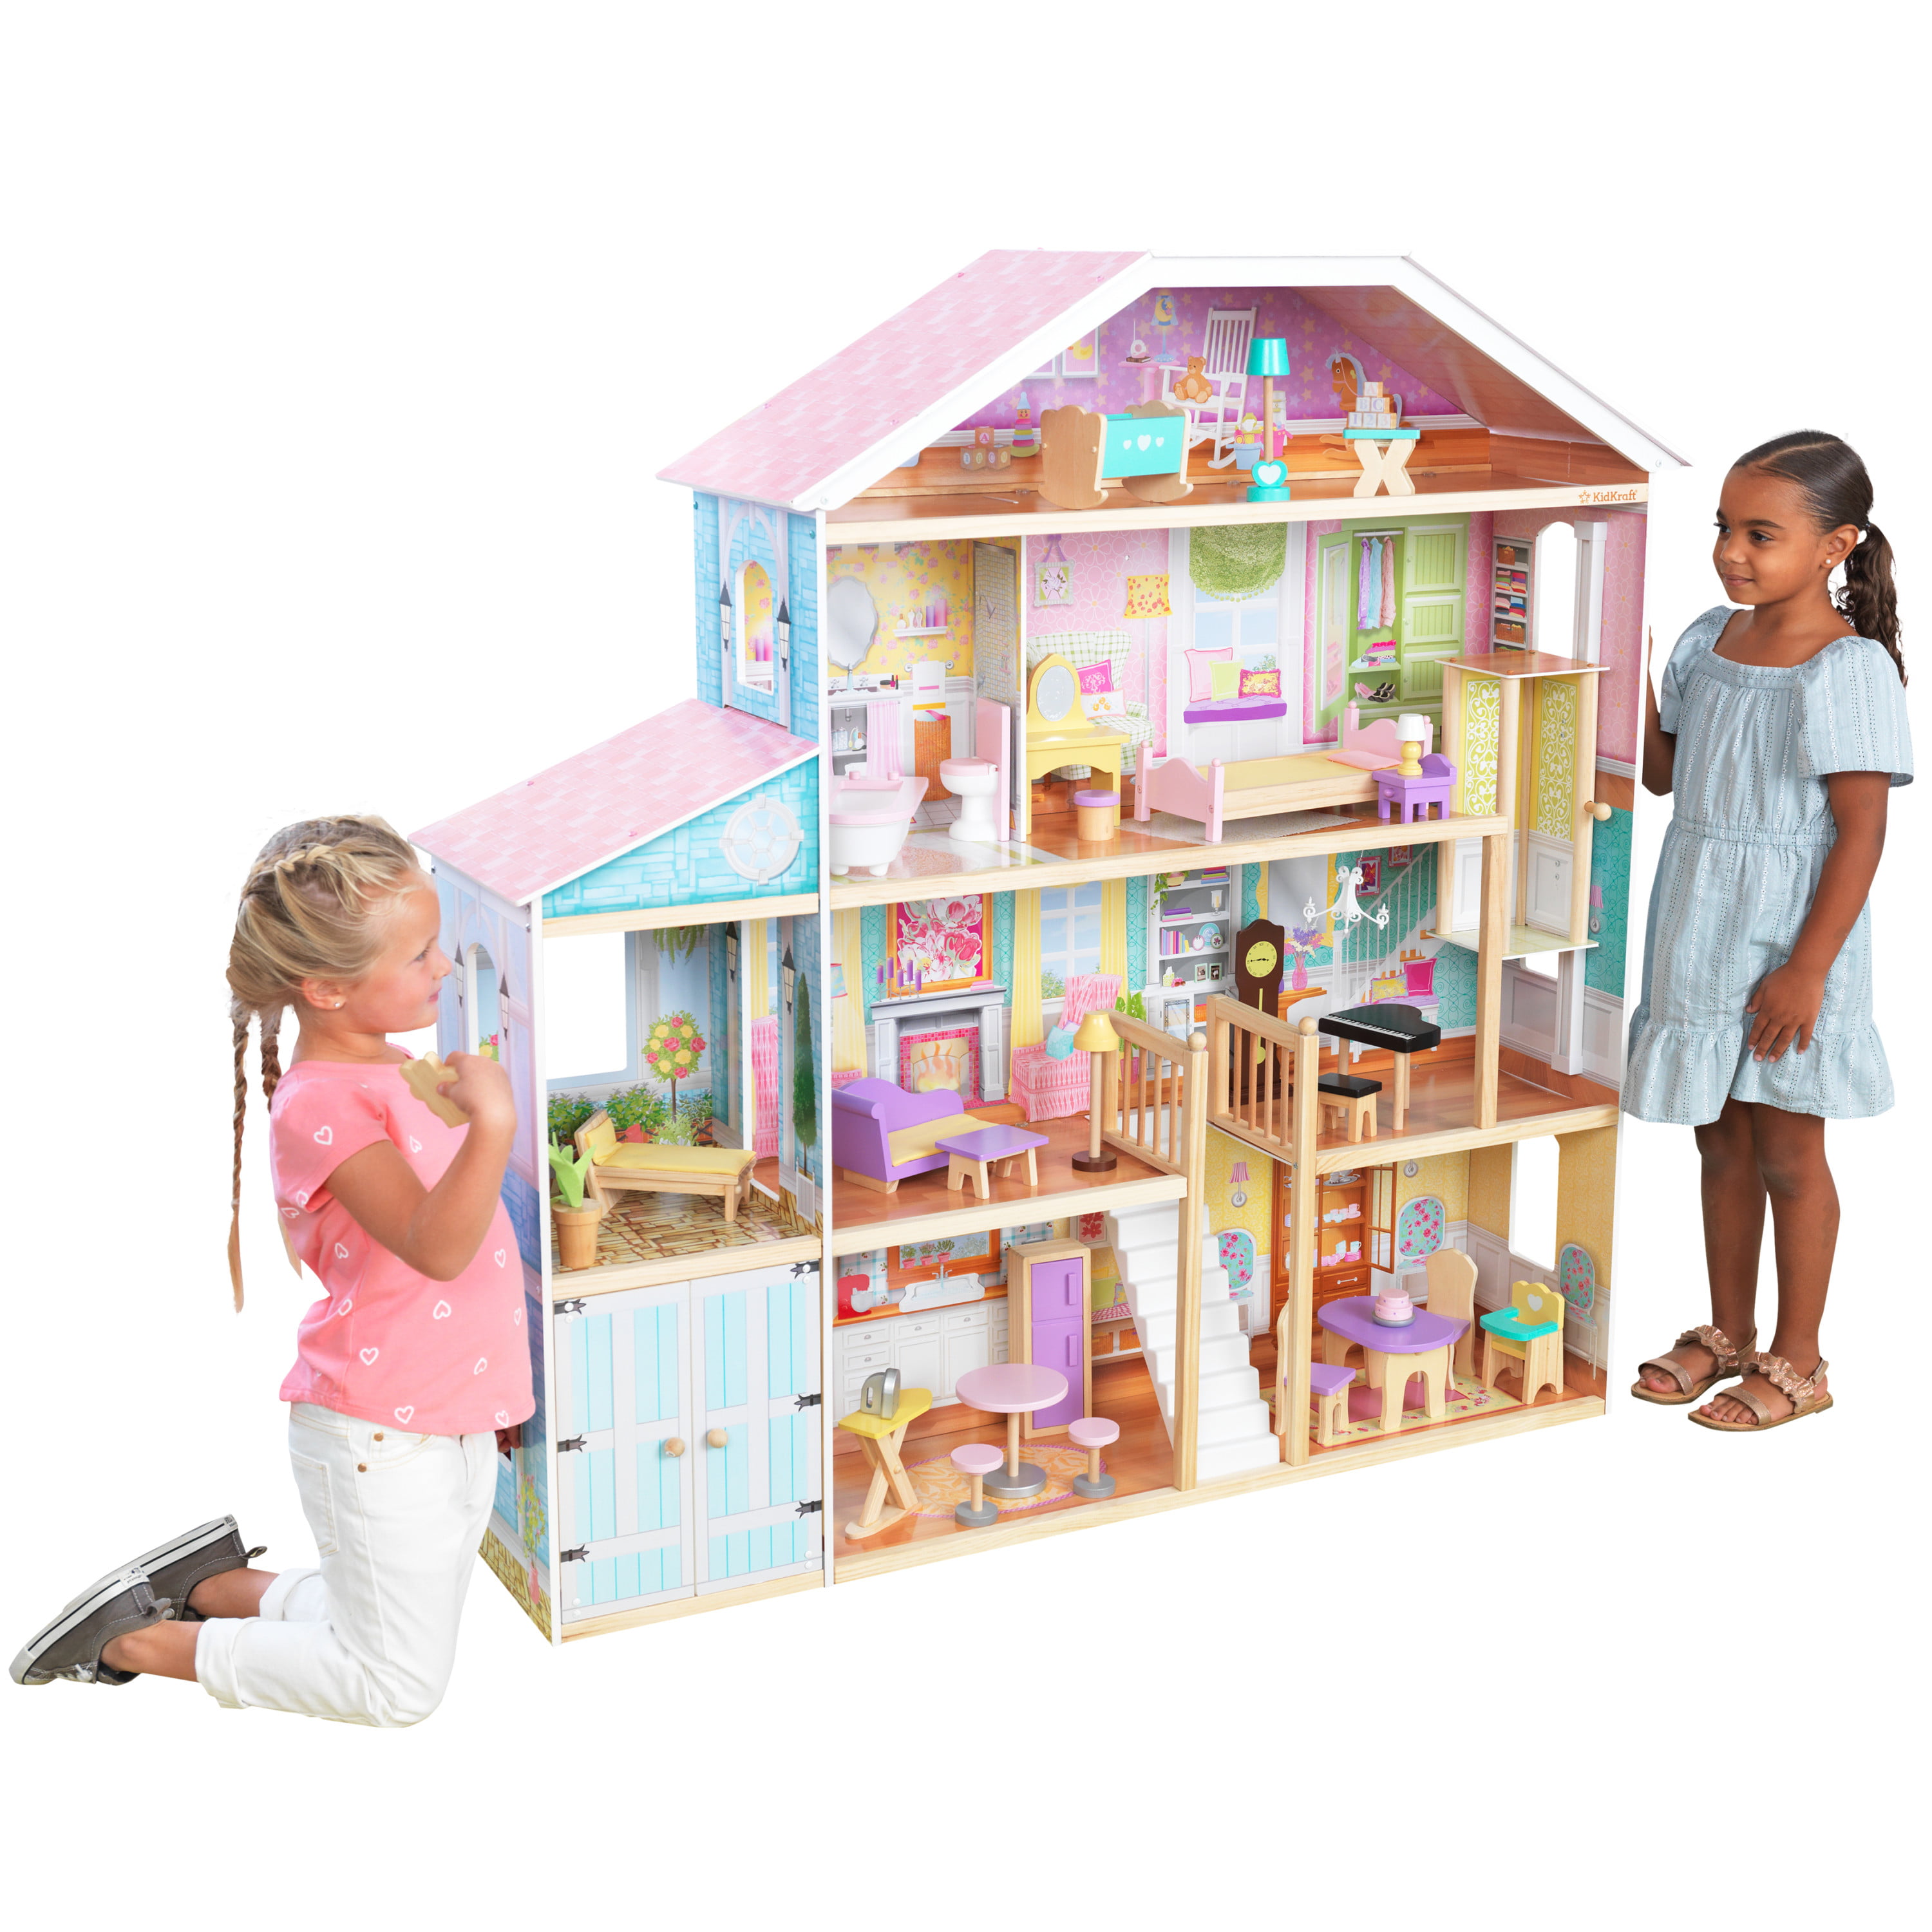 Storybook Mansion Dollhouse with 14-Piece Furniture & Accessory Set by KidKraft 